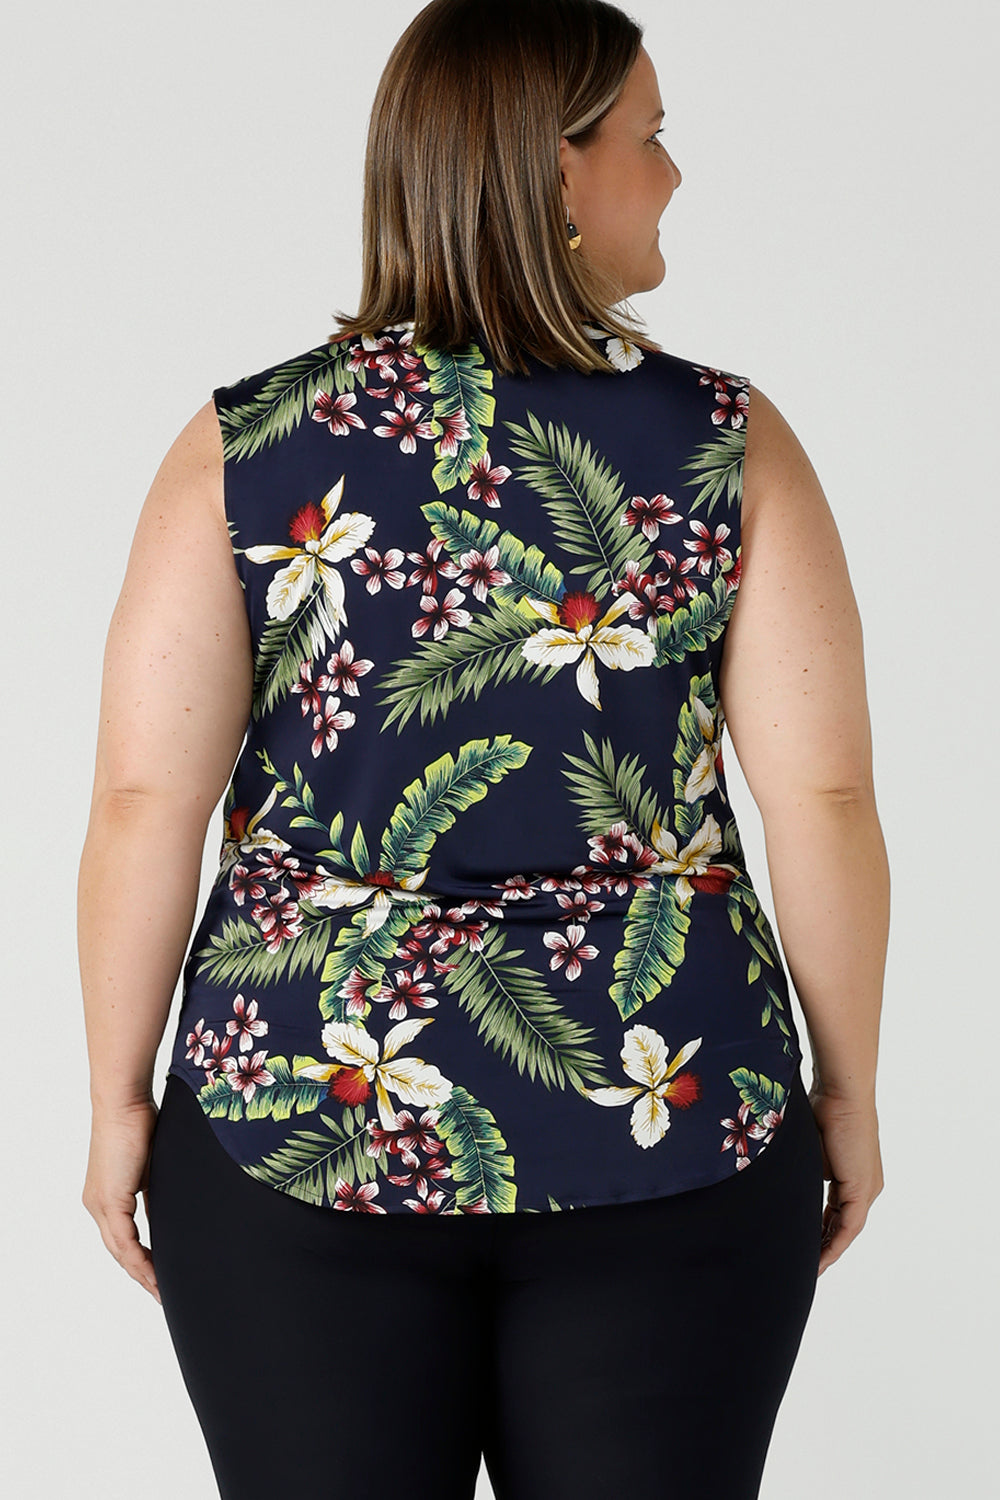 Back view of a curvy size 18 woman wears a Joni Top in Merriment print. The perfect top to wear for the Christmas festive season and on Christmas day. The top features a cowl neckline and soft stretch jersey material. Made in Australia for sizes 8-24.